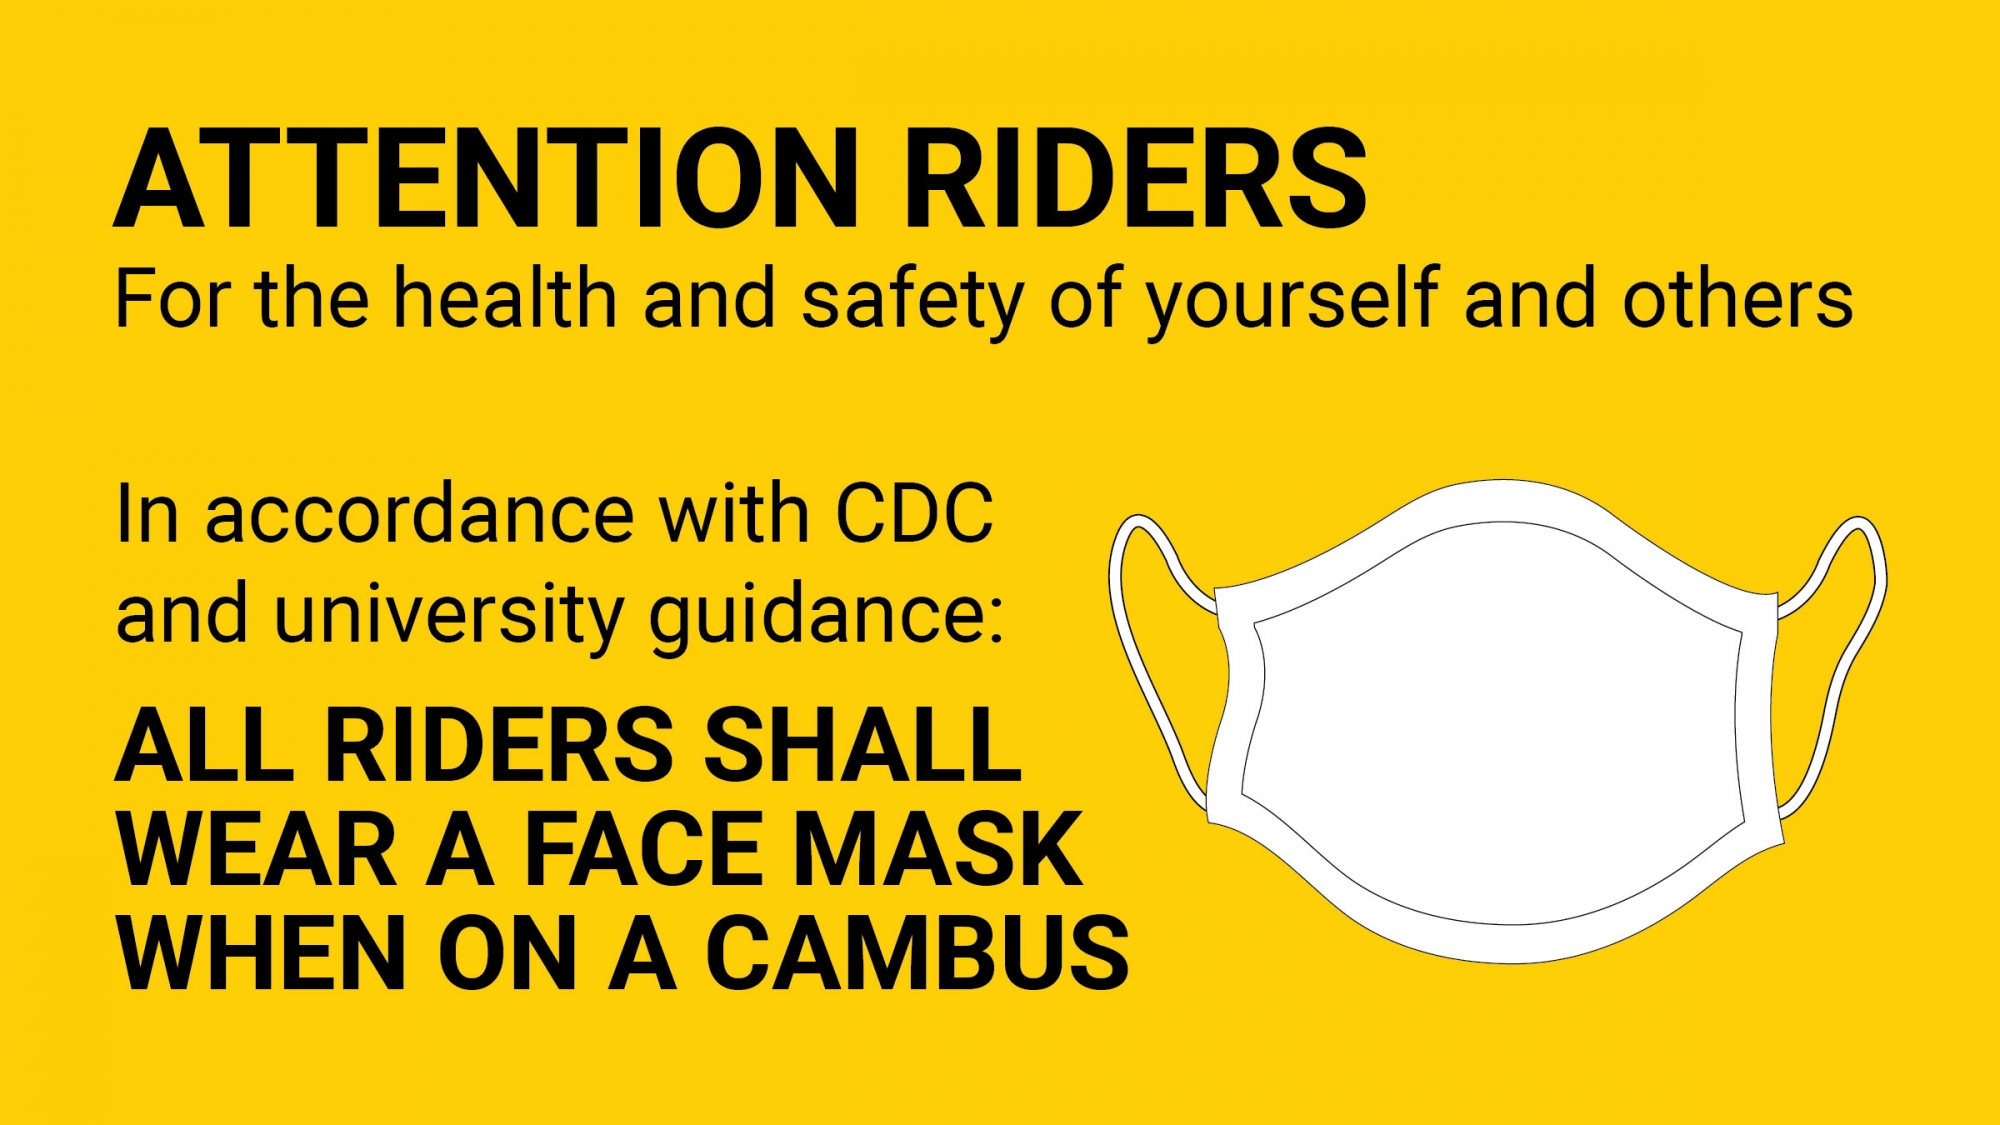 All rider shall wear a face mask when on a Cambus